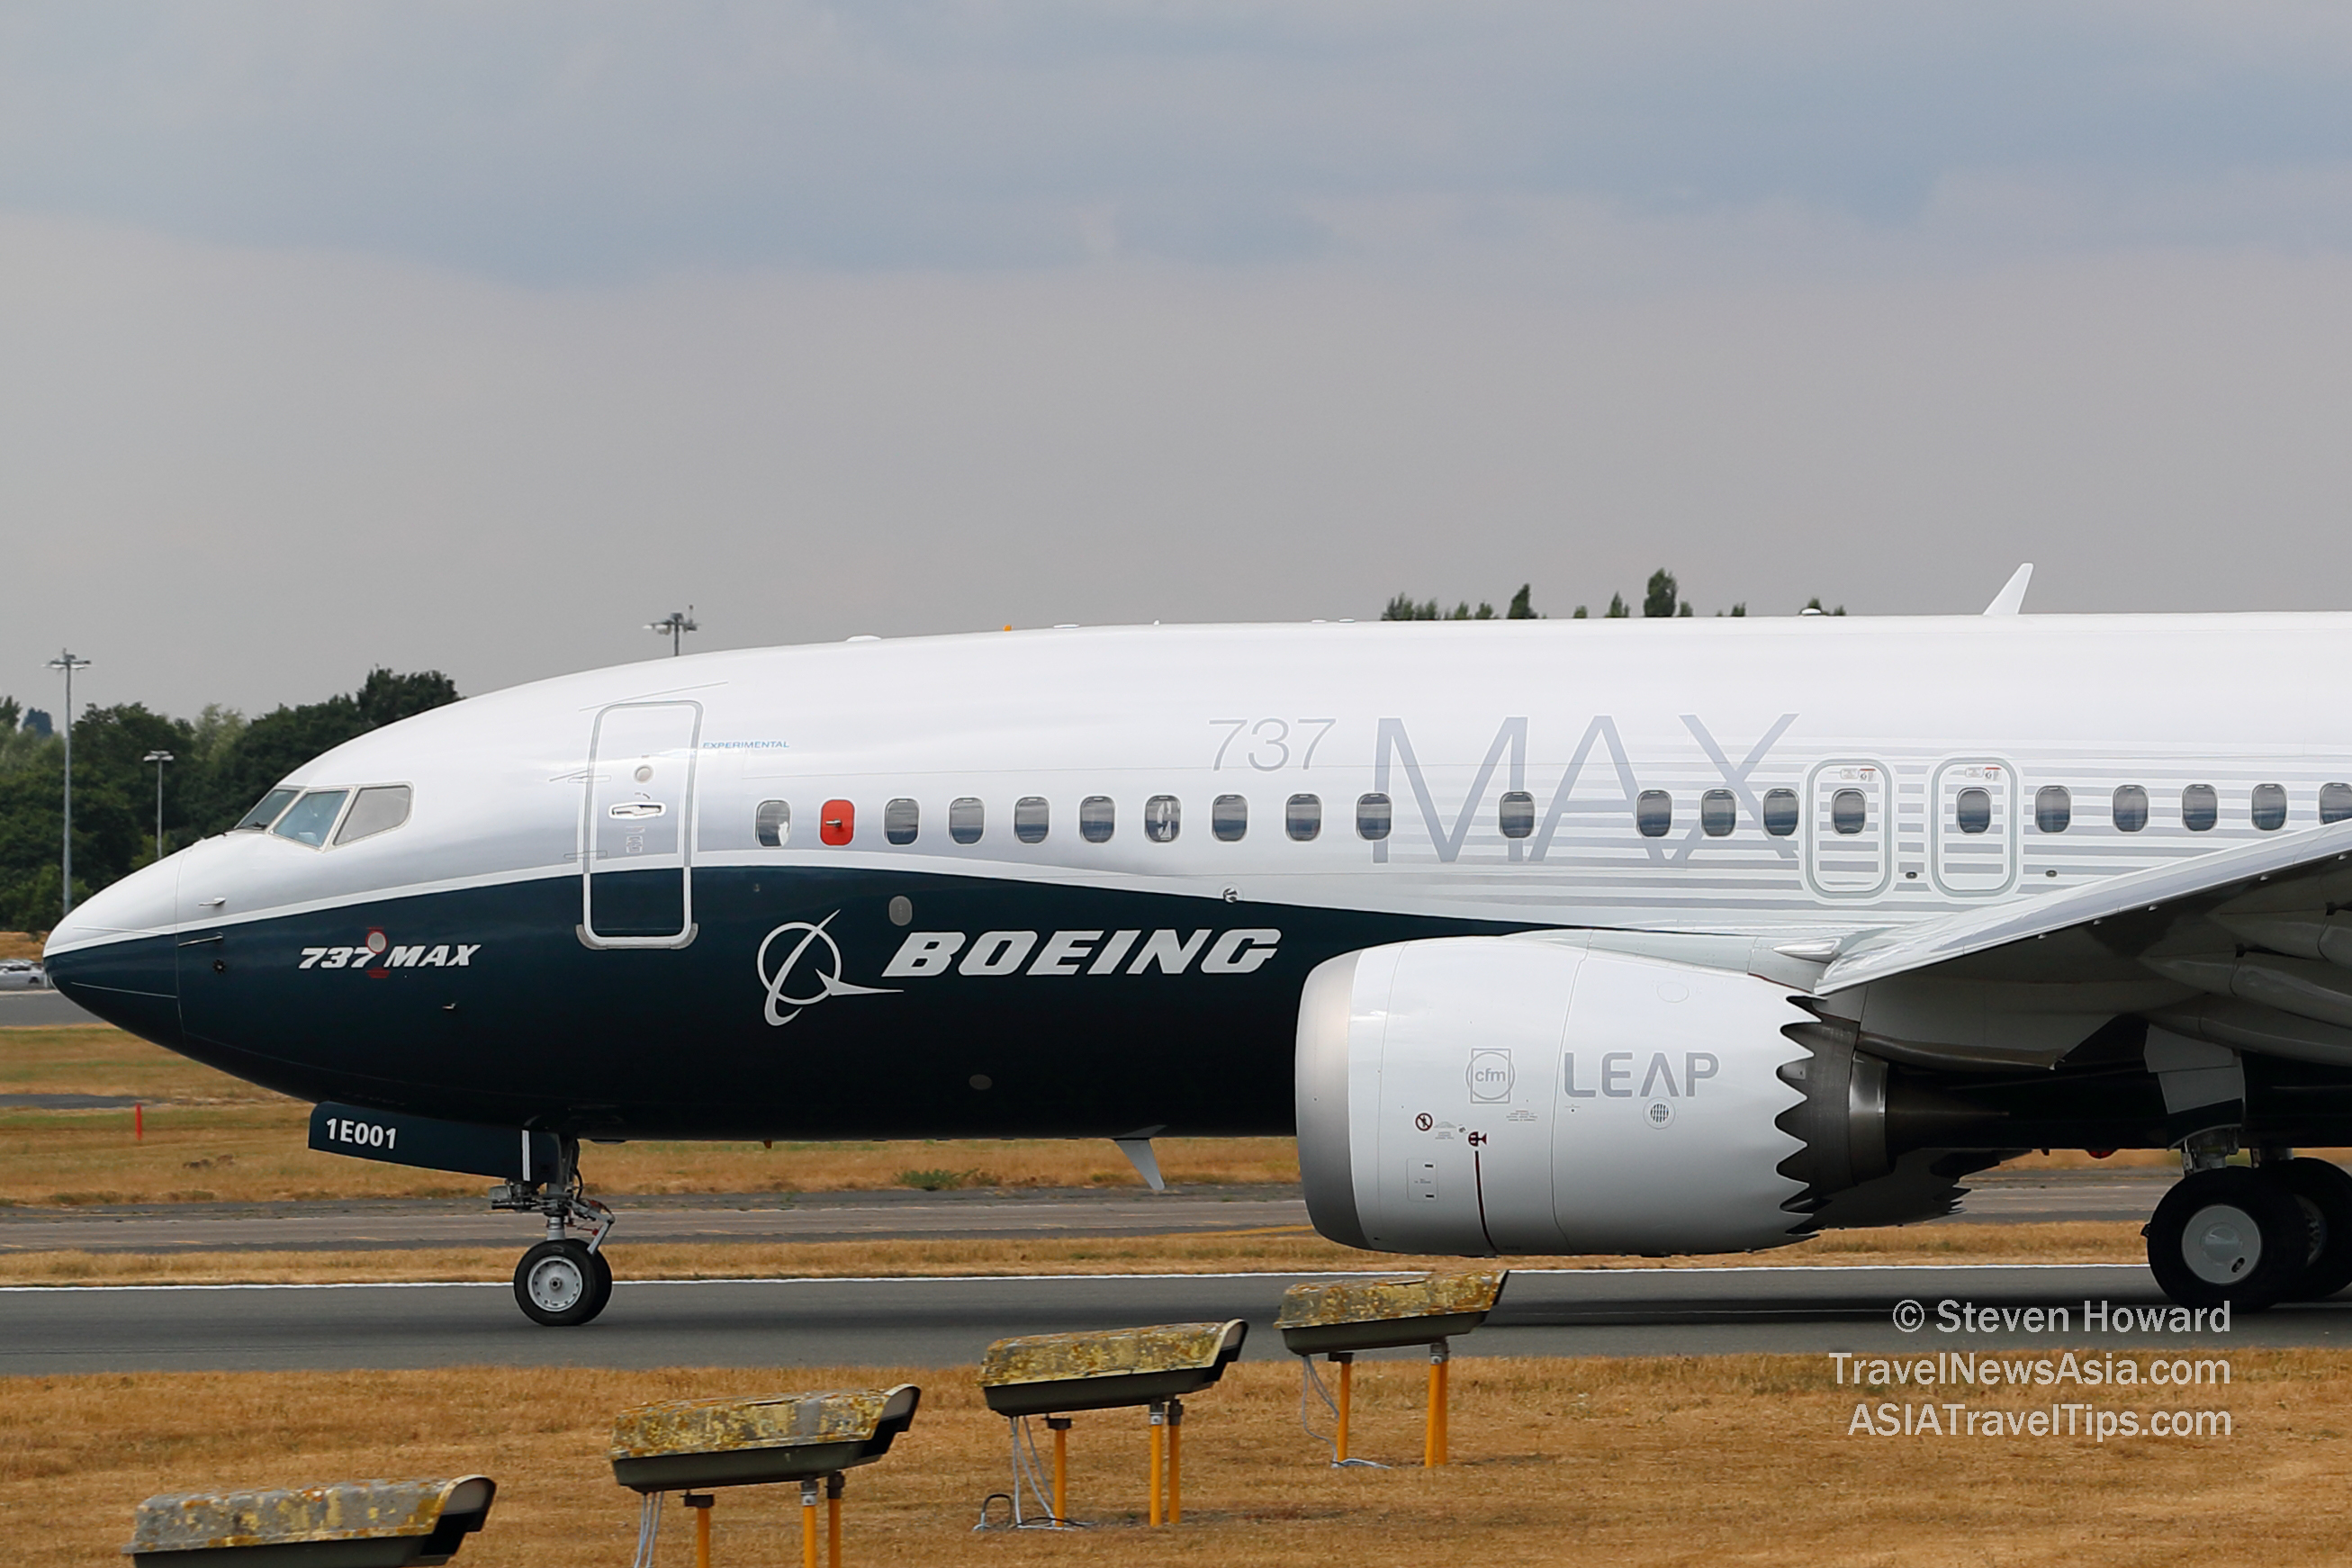 Boeing 737 MAX. Picture by Steven Howard of TravelNewsAsia.com Click to enlarge.